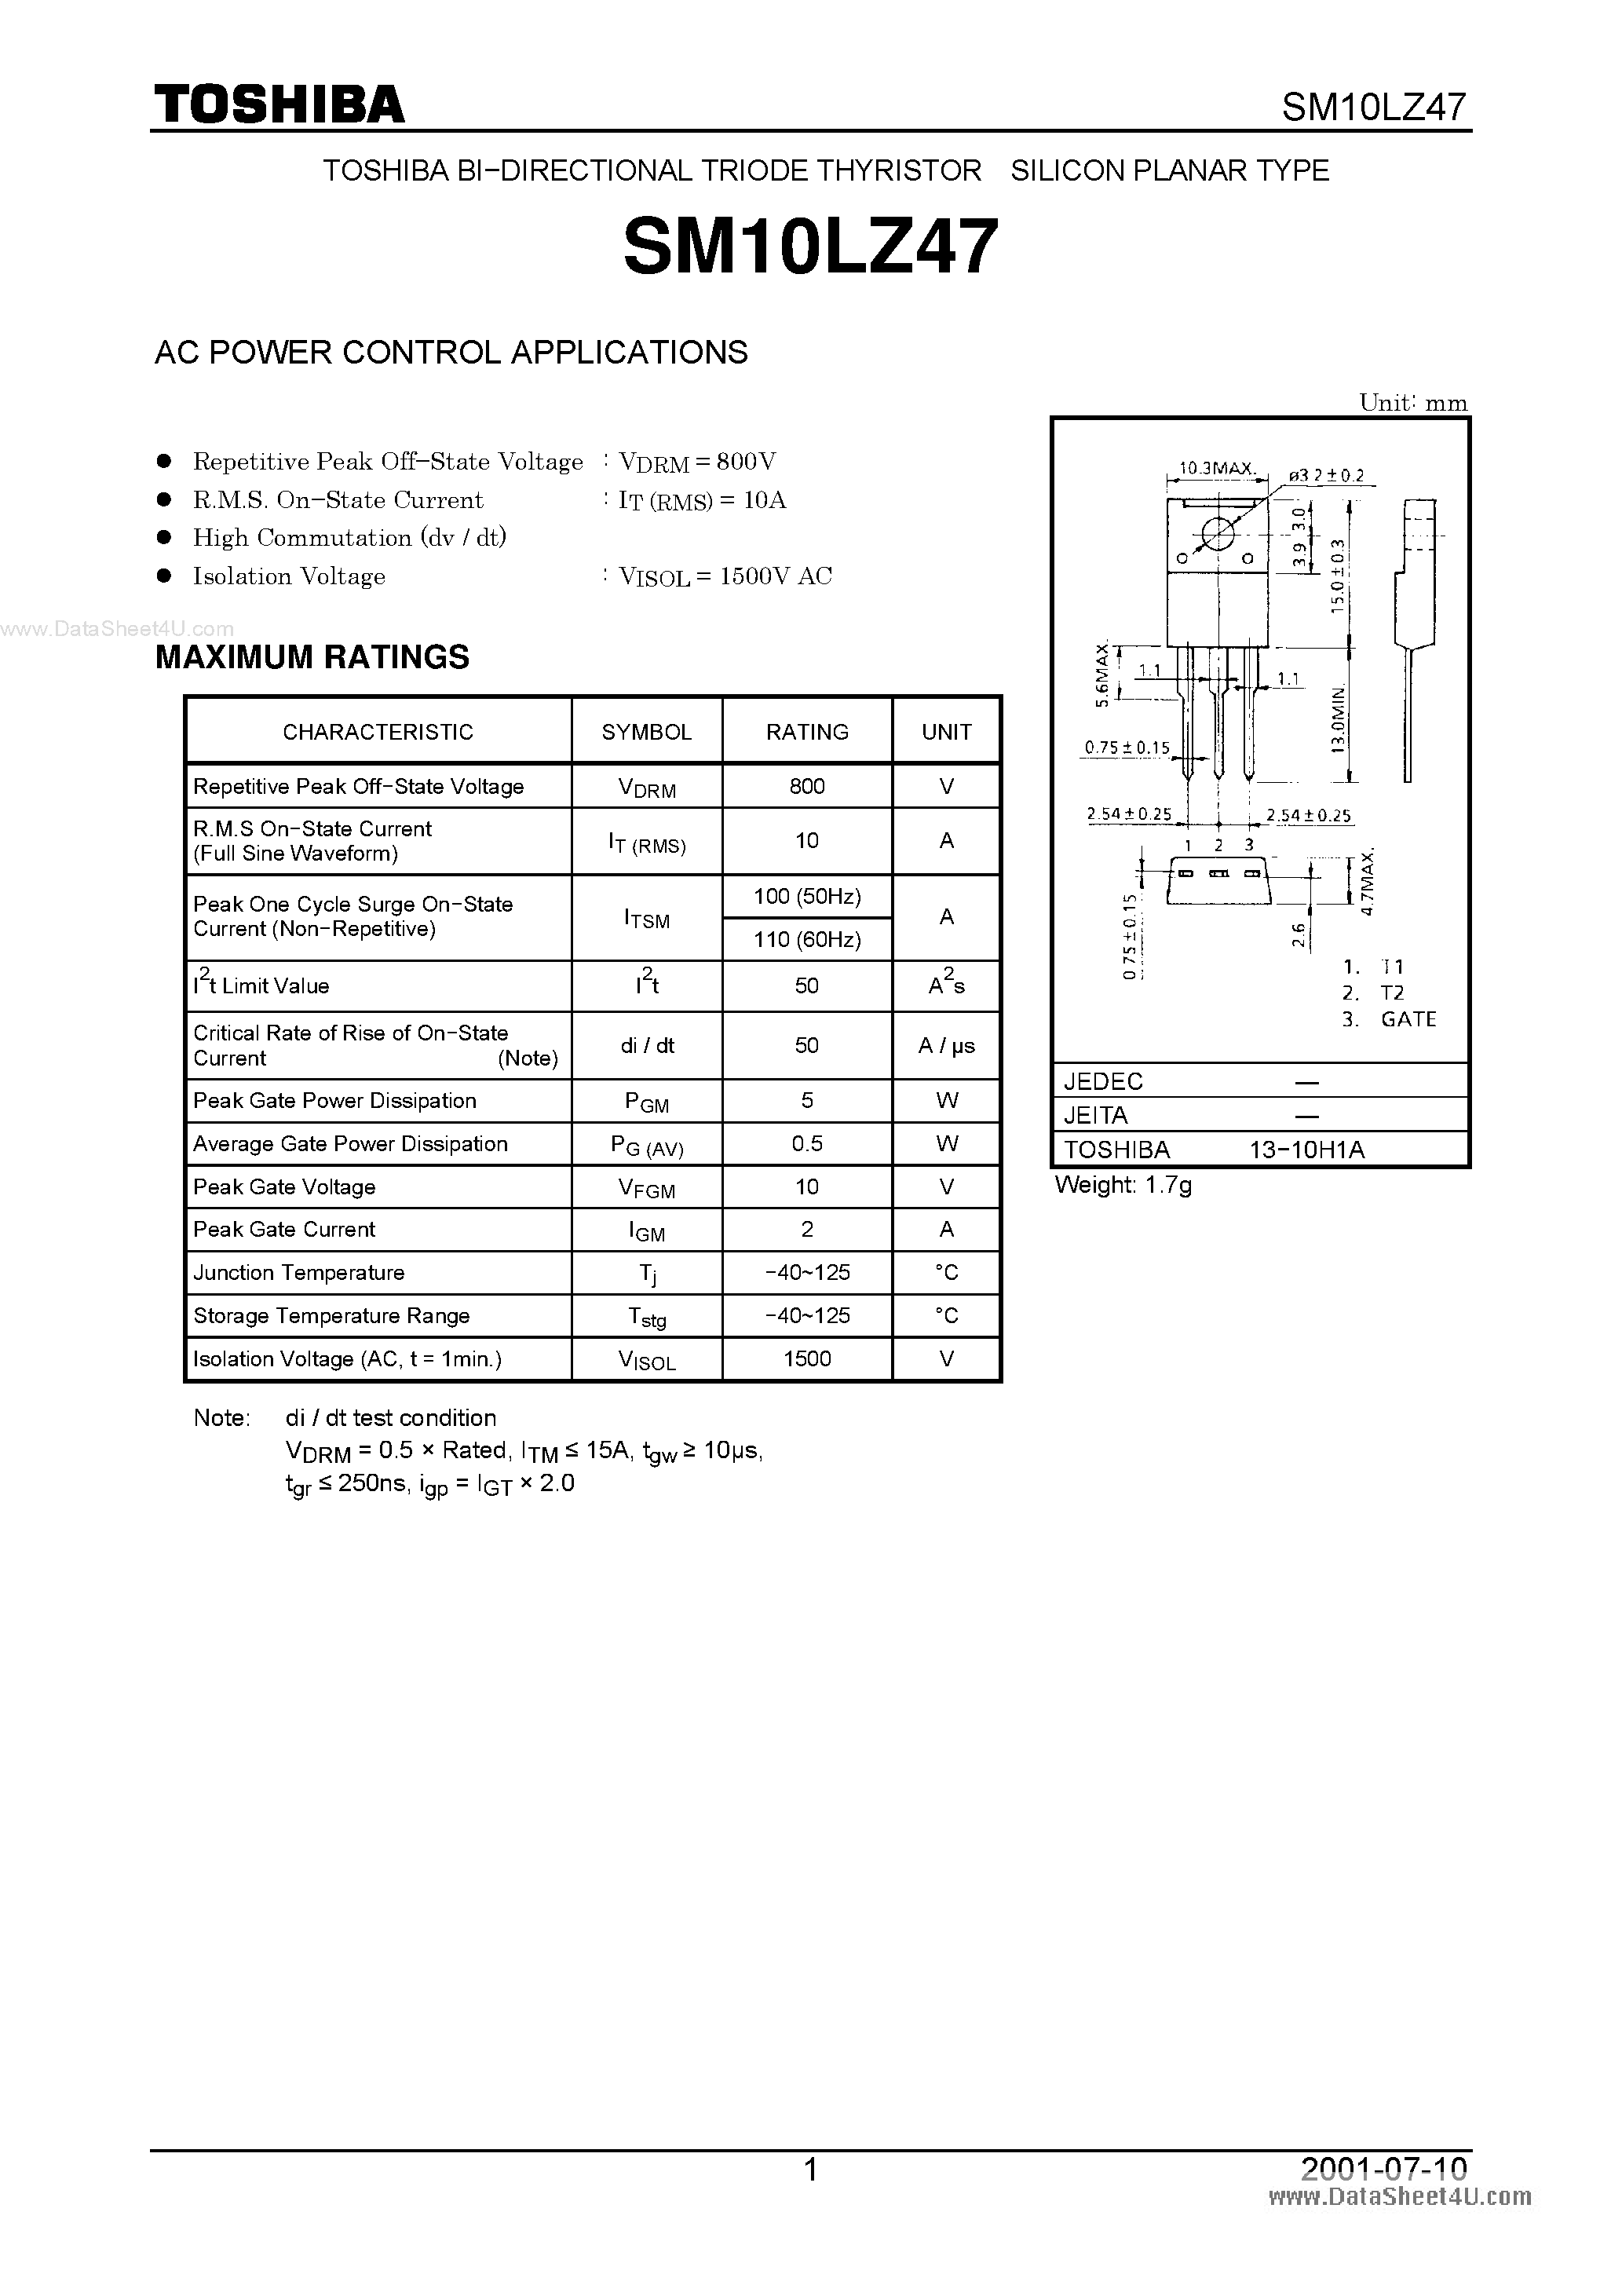 Datasheet SM10LZ47 - AC POWER CONTROL APPLICATIONS page 1